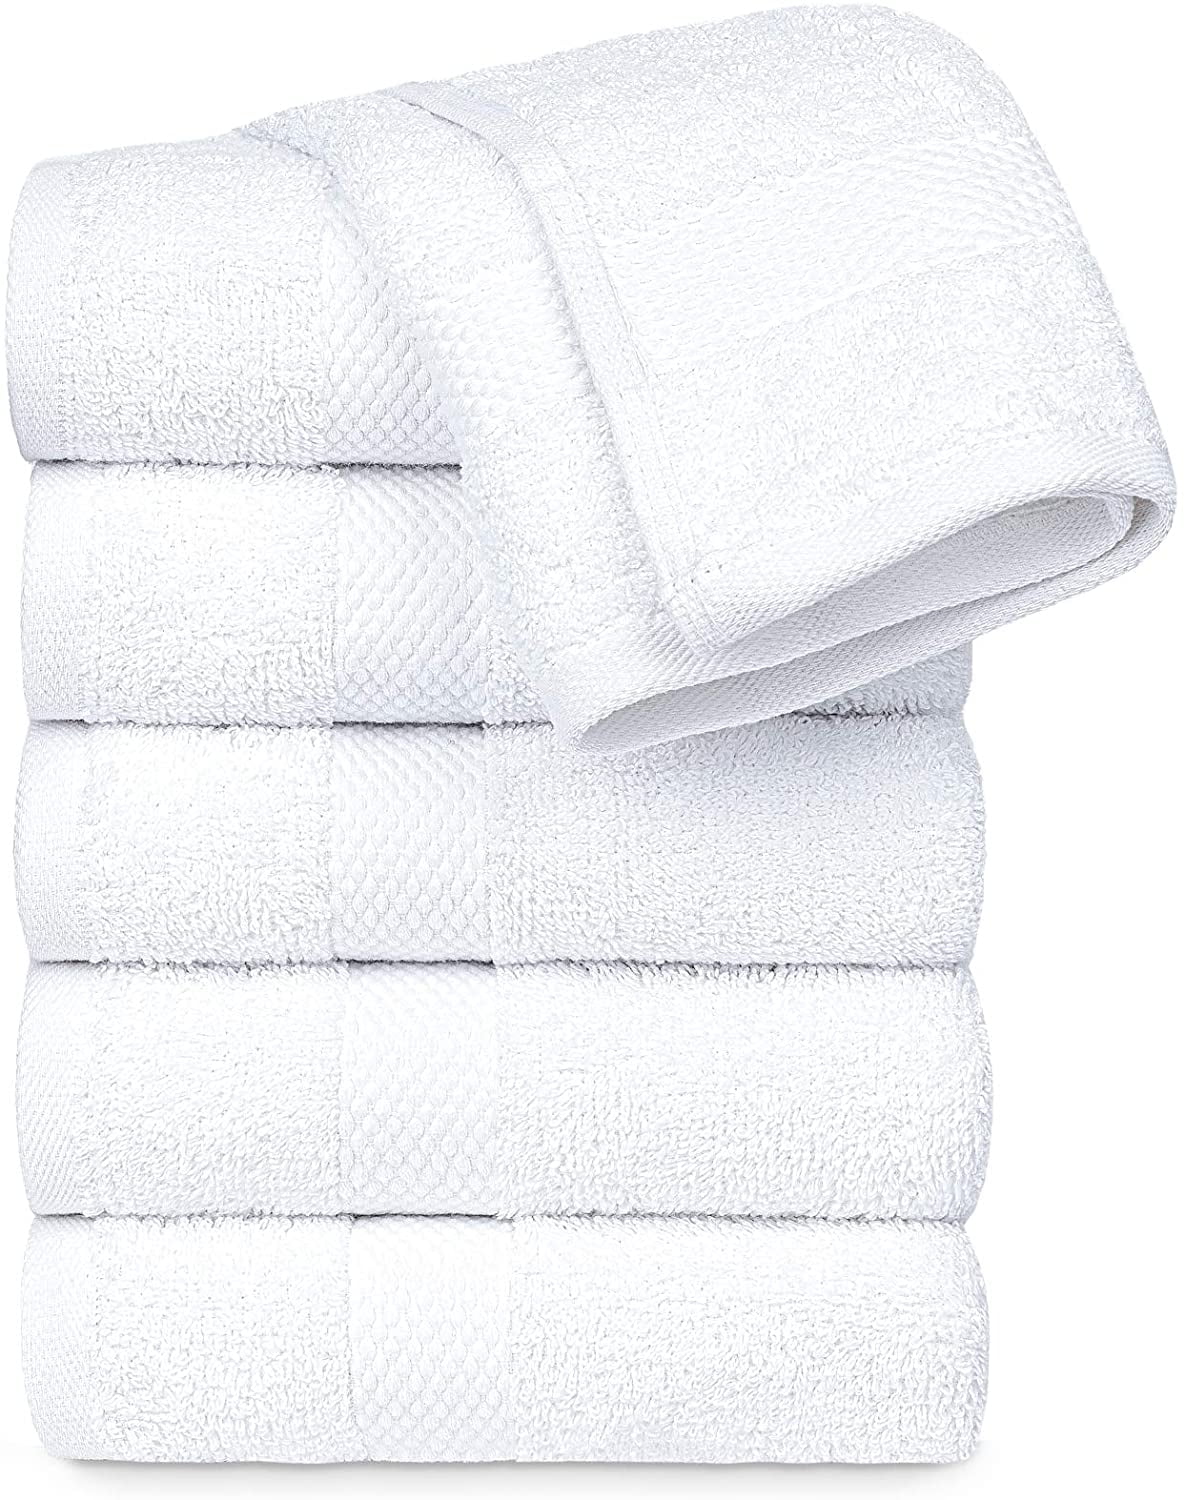 Lizling Hand Towels 6 Pack, Hand Towels for Bathroom,100% Cotton,13 x 29  Inch, Soft and Highly Absorbent, Hand Towel Set for Face,Hotel, Spa, Sport